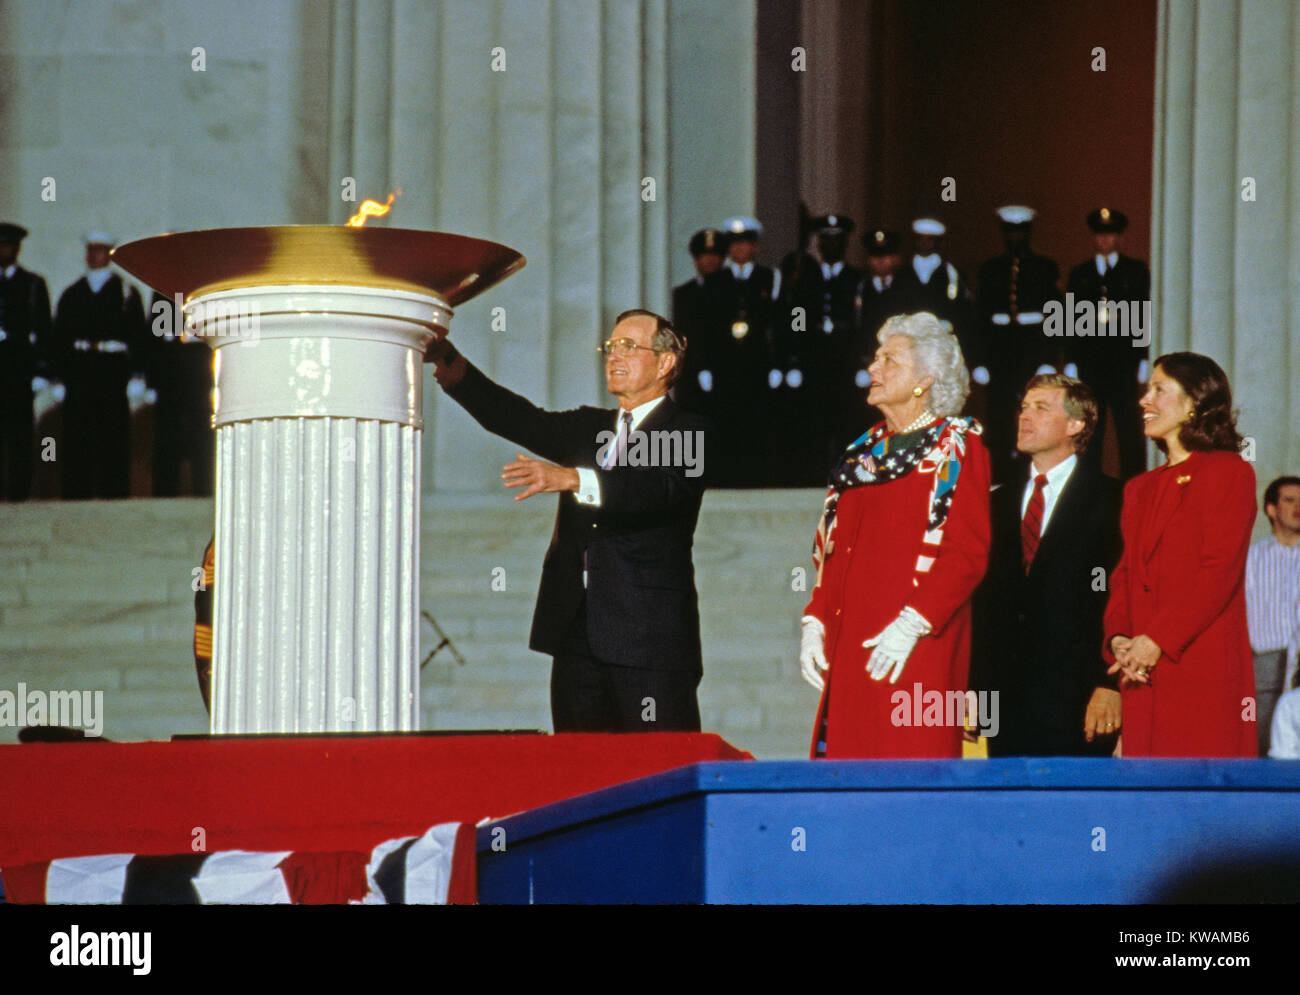 United States President-elect George H.W. Bush participates in the ceremonial candle lighting to conclude the opening ceremony for his inauguration at the Lincoln Memorial in Washington, DC on January 18 1989. From left to right: President-elect Bush, Barbara Bush, Marilyn Quayle, and US Vice President-elect Dan Quayle. Credit: Robert Trippett/Pool via CNP - NO WIRE SERVICE - Photo: Robert Trippett/Consolidated/dpa Stock Photo